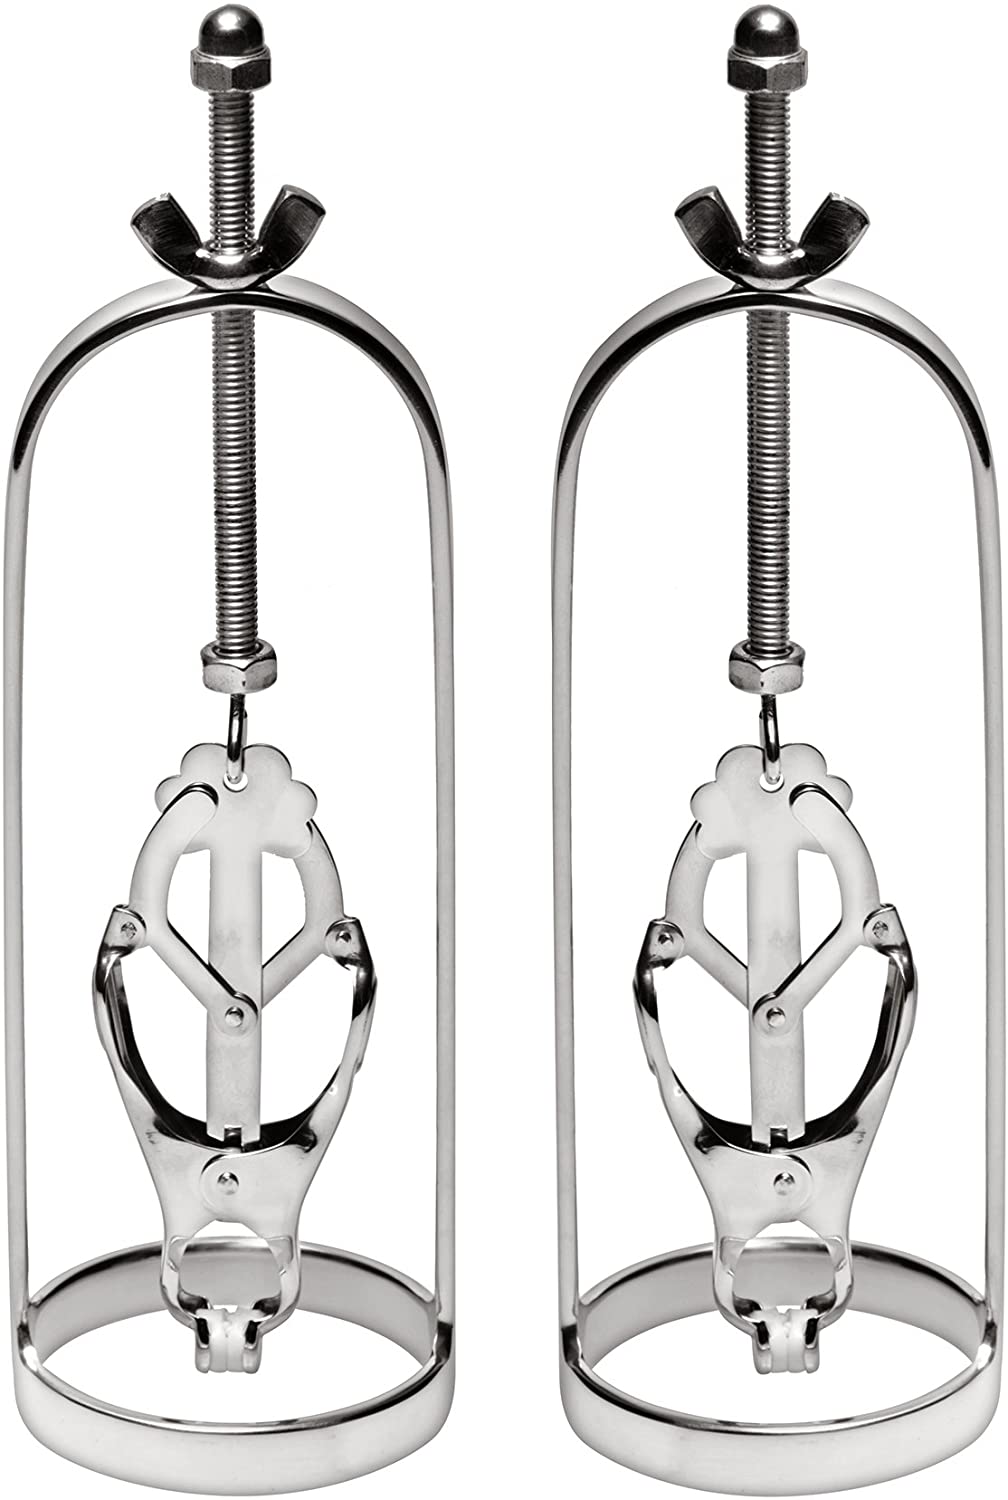 Stainless Steel Clover Clamp Nipple Stretcher (6989220479140)